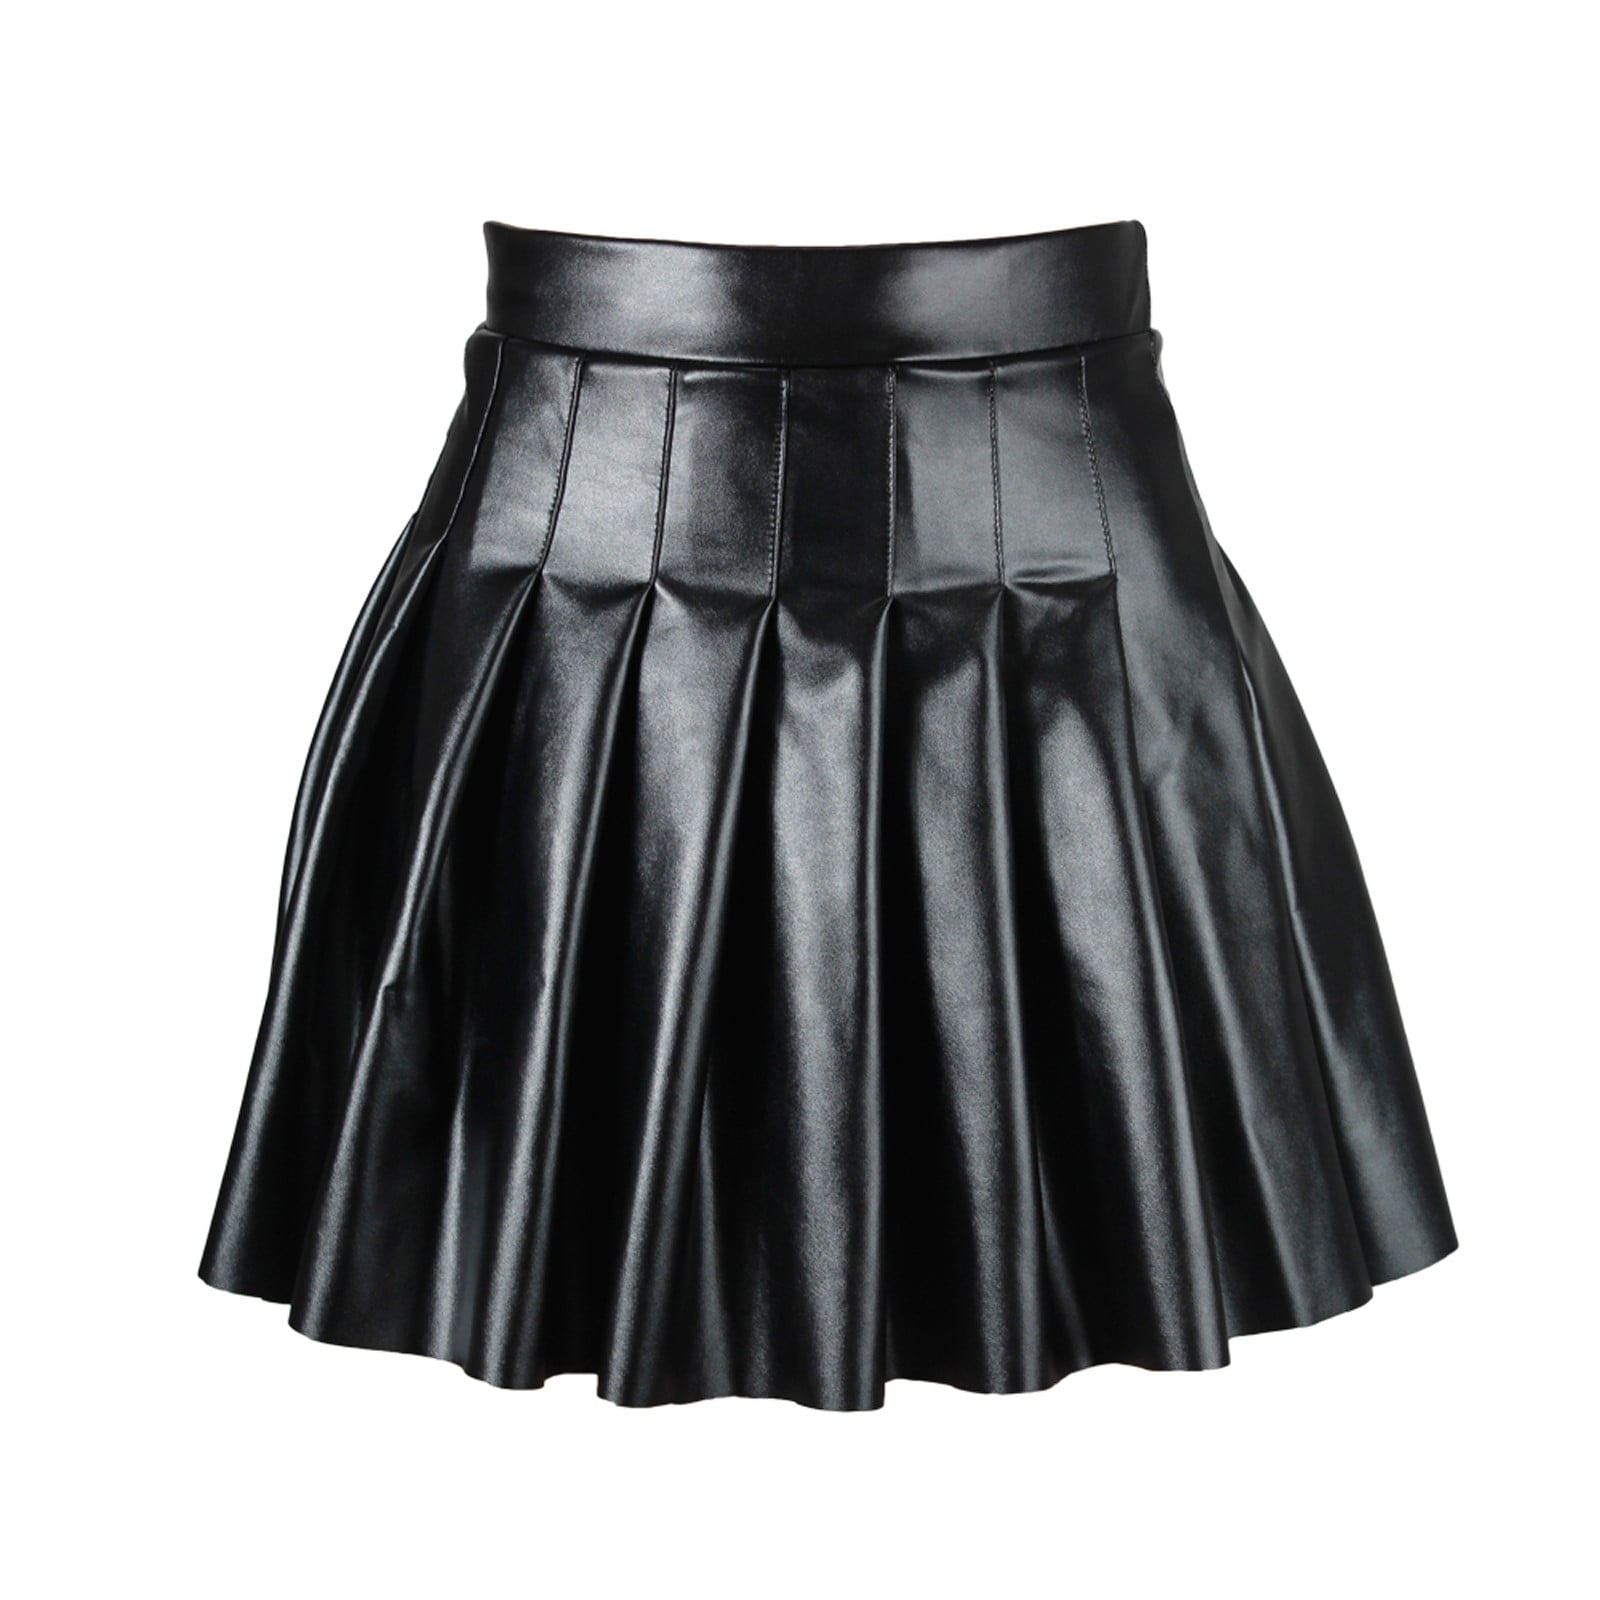 Kcocoo Women's High Waist Pleated Solid Short Skirt Elegant Leather ...